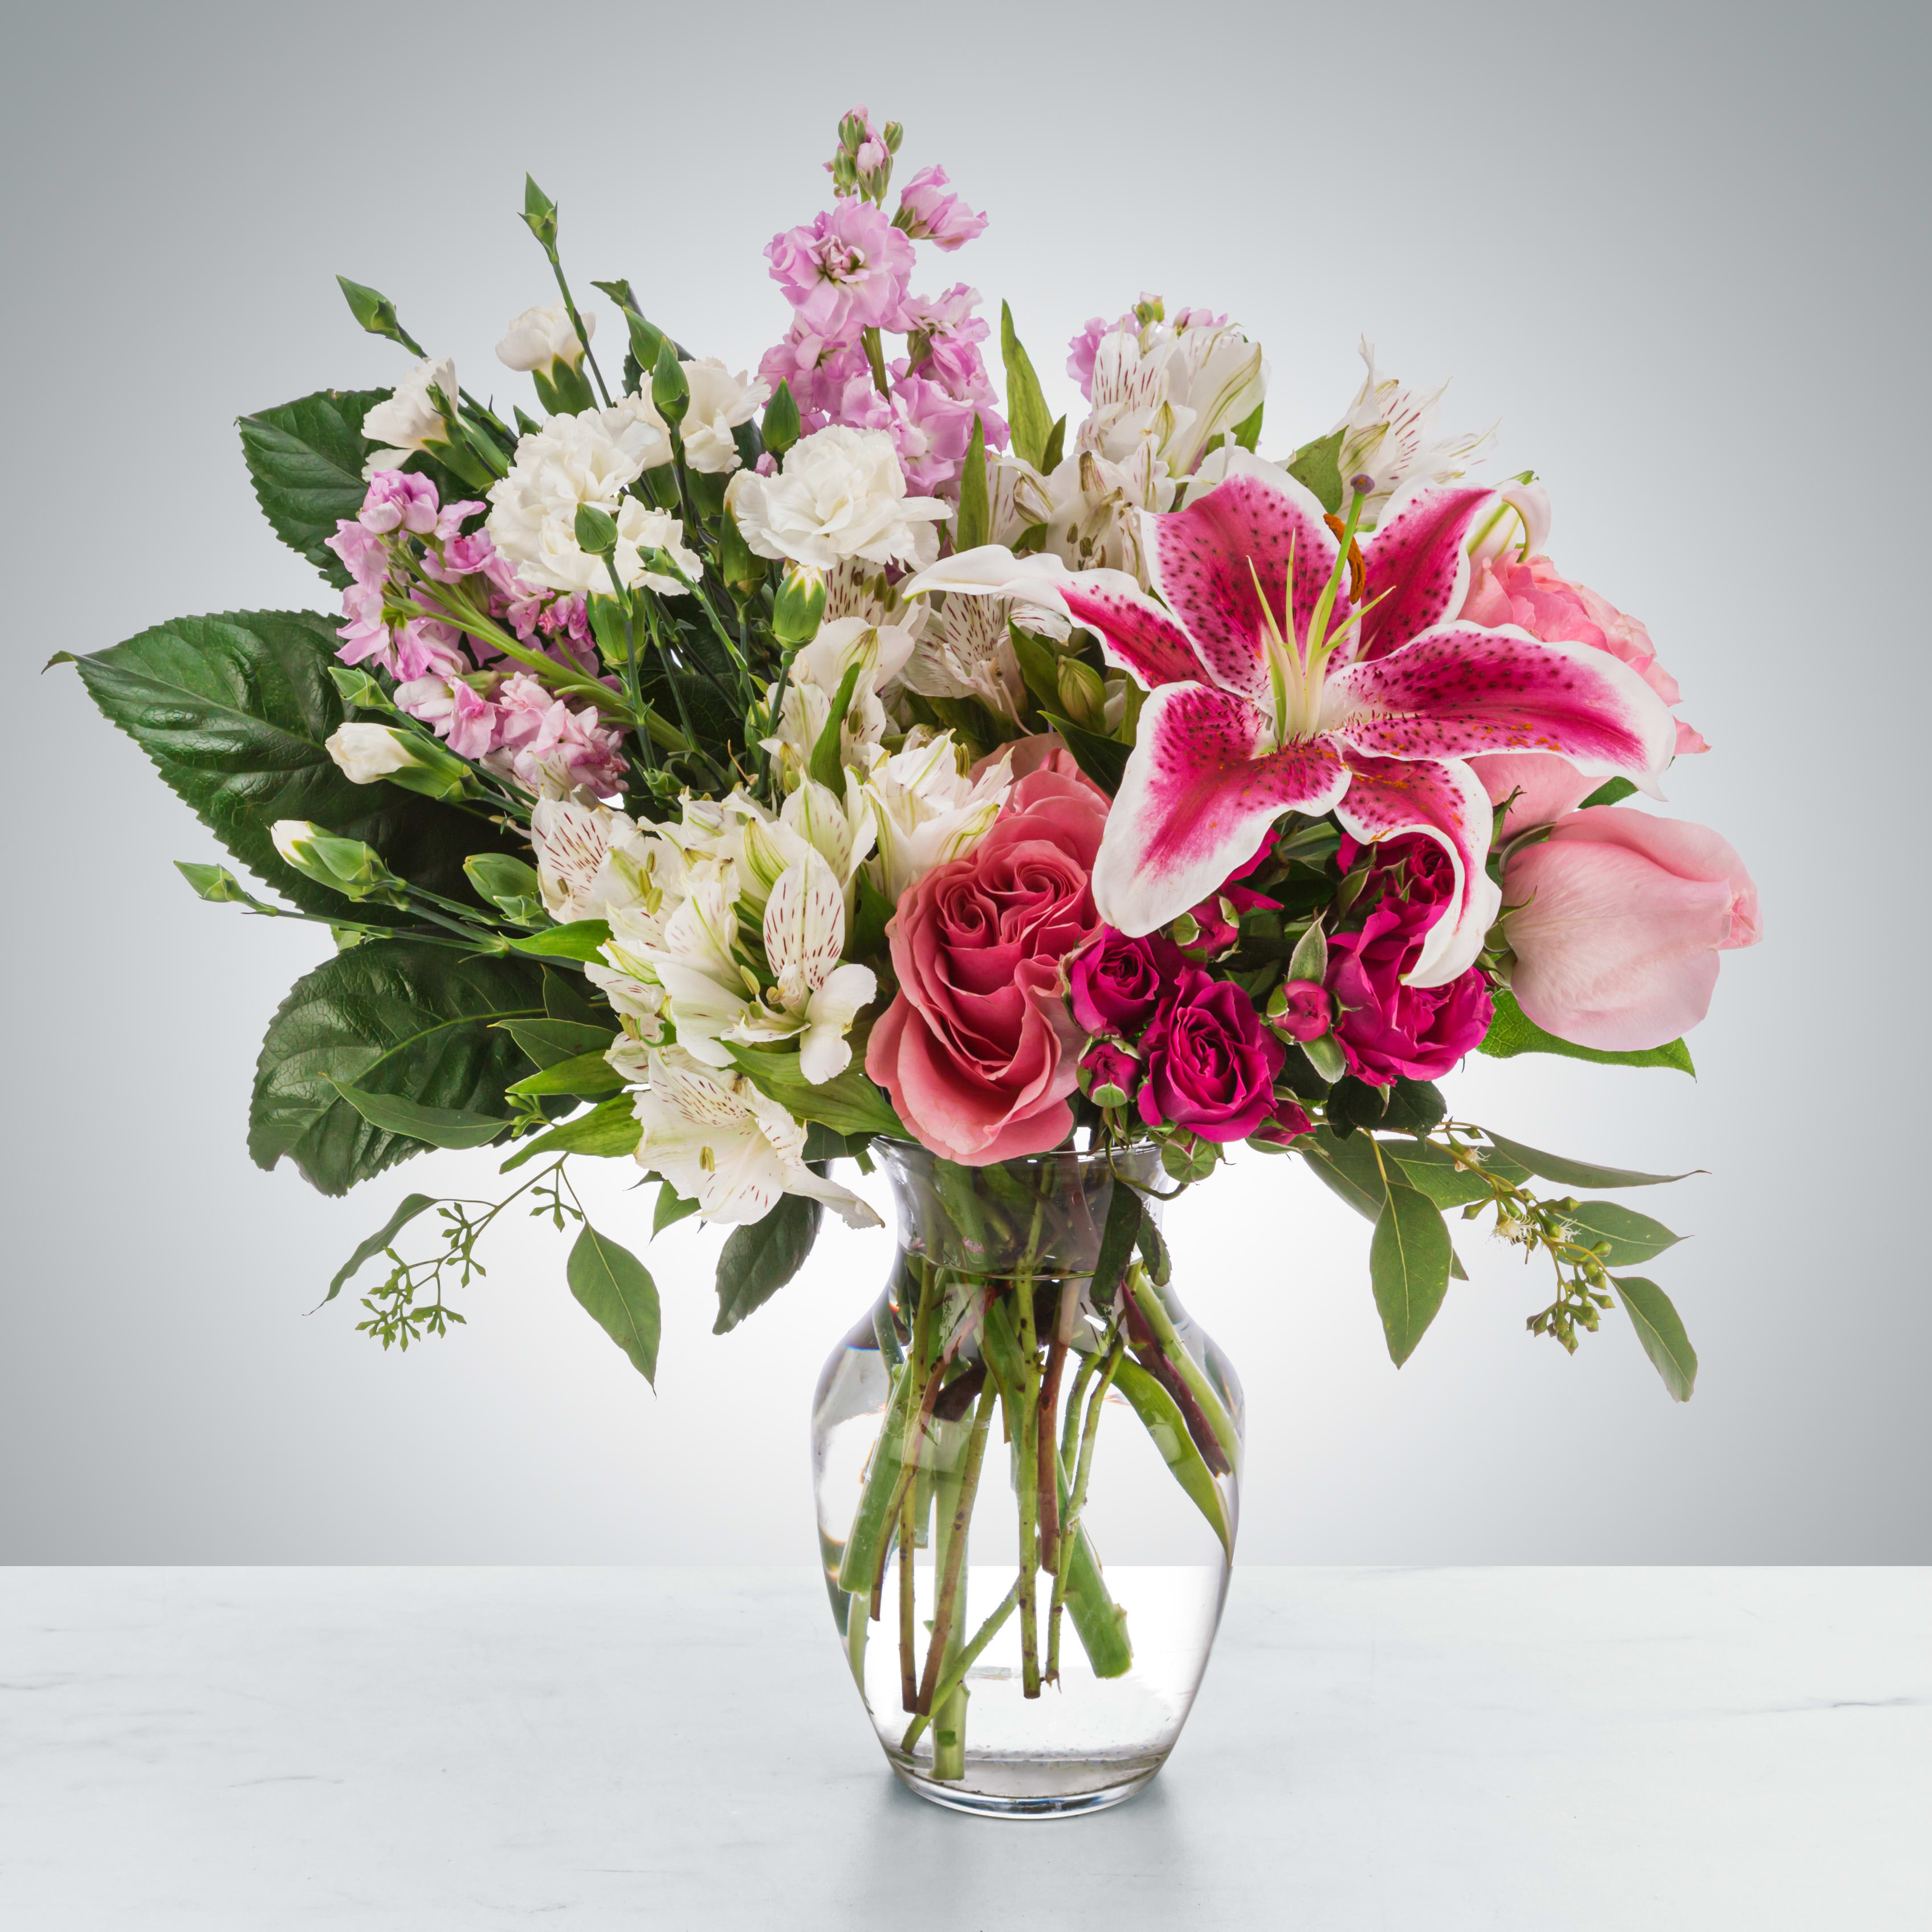 Sweethearts  -  Get them this sweet arrangement to celebrate your love. Blooms say it all!!  